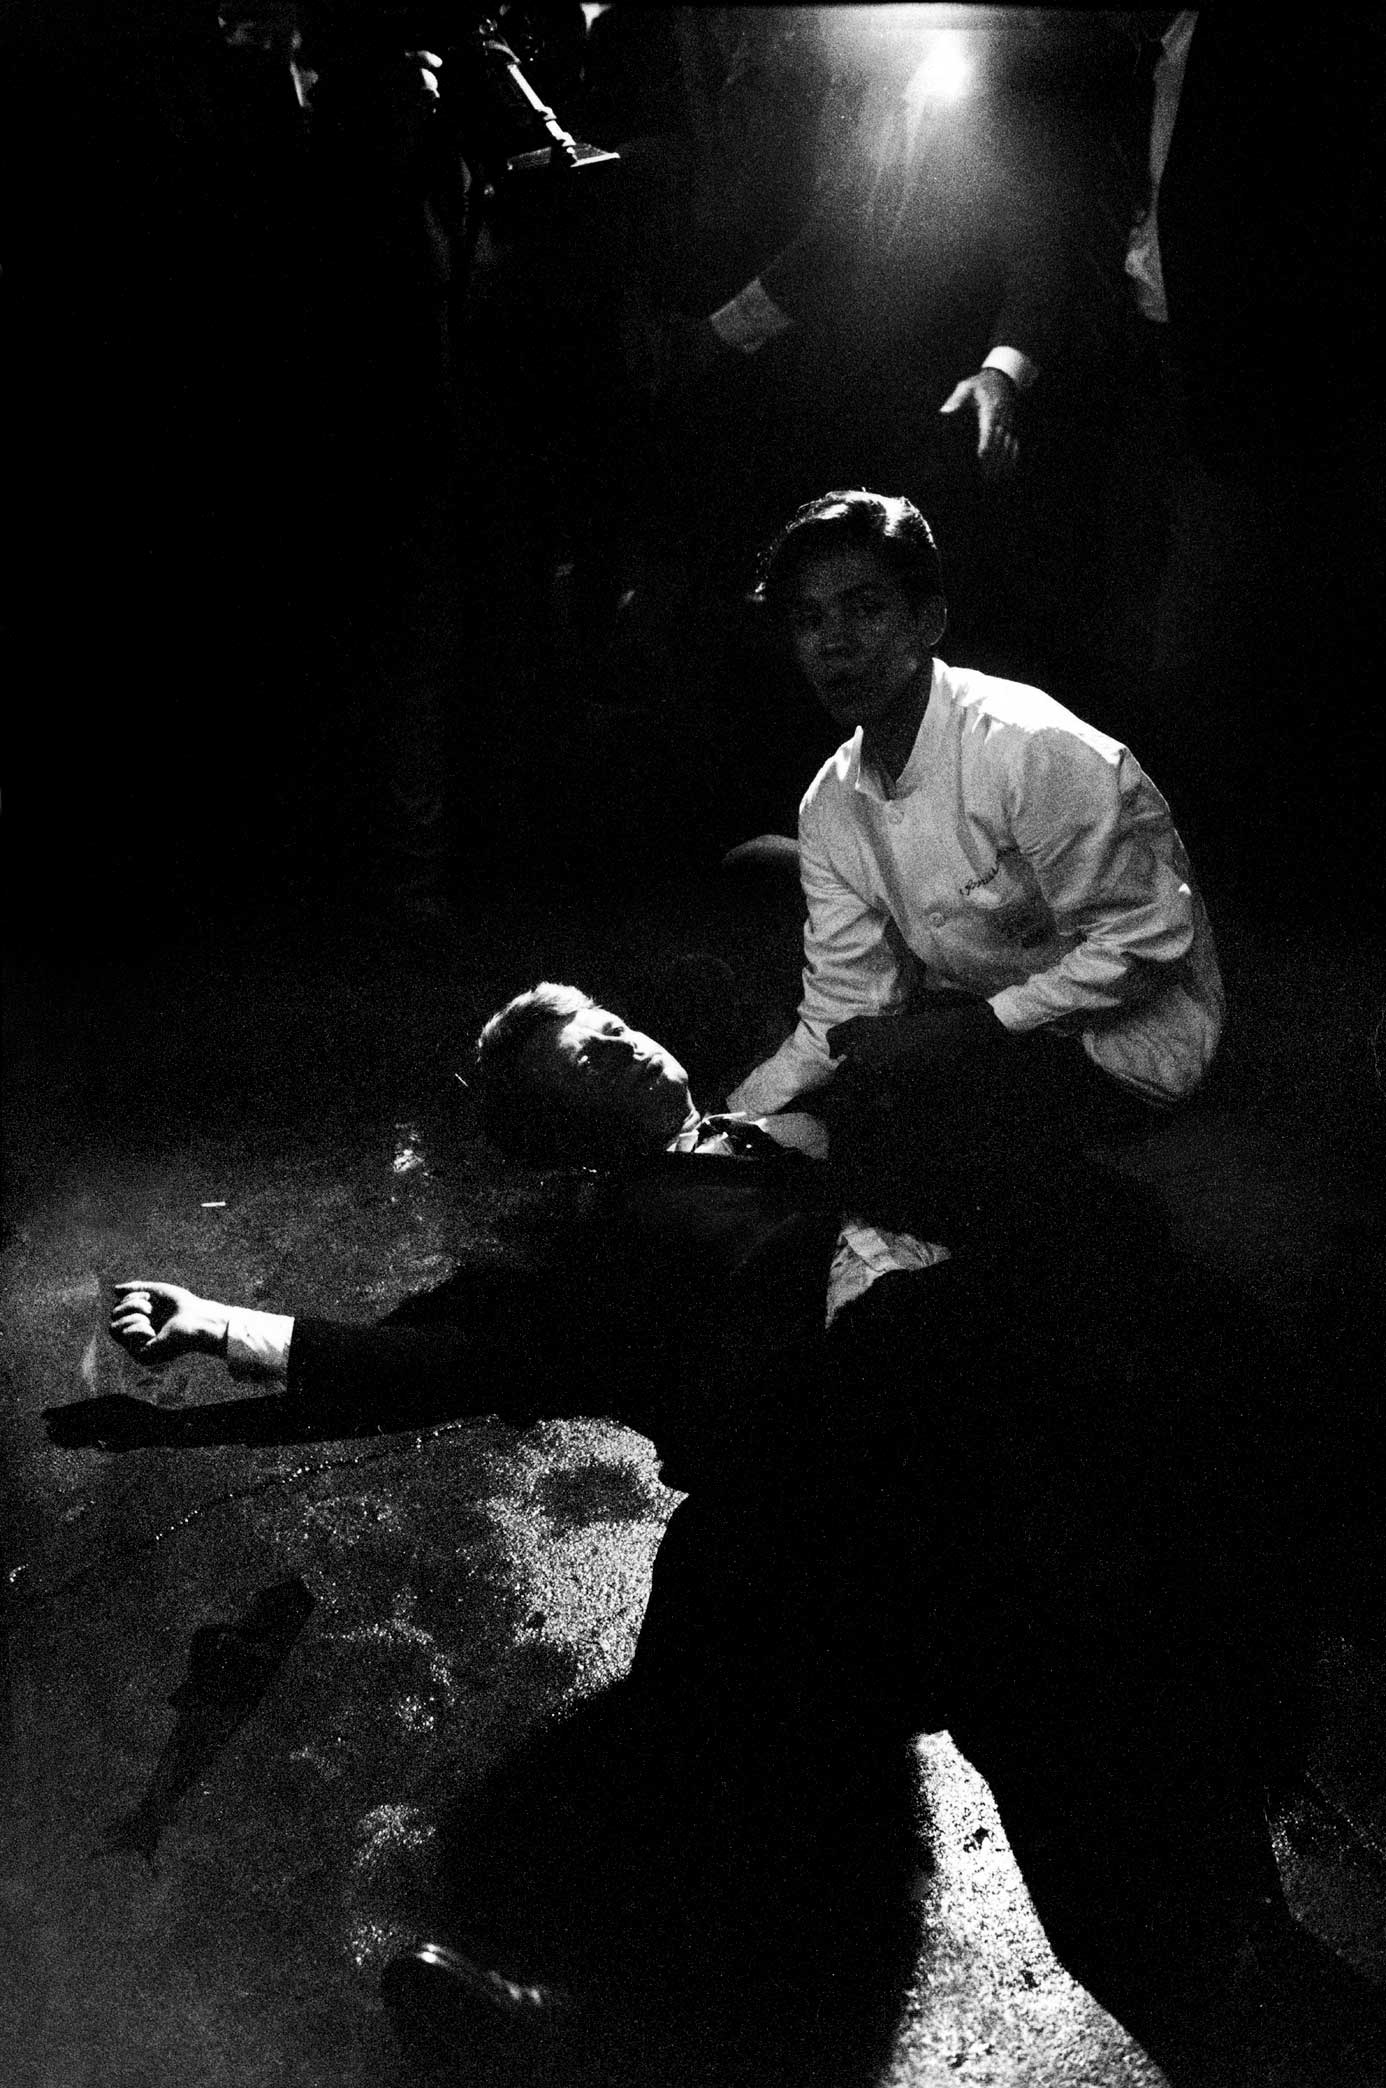 1968 | Senator Robert Kennedy lies in a pool of his own blood on the floor of the kitchen at Los Angeles' Ambassador Hotel, June 5, 1968, after being shot by Jordanian-born assassin Sirhan Sirhan. A dazed, frightened hotel busboy, Juan Romero, tries to comfort the mortally wounded presidential candidate, who died hours later. Robert Kennedy was 42 years old. Originally published in the June 14, 1968, issue of LIFE.